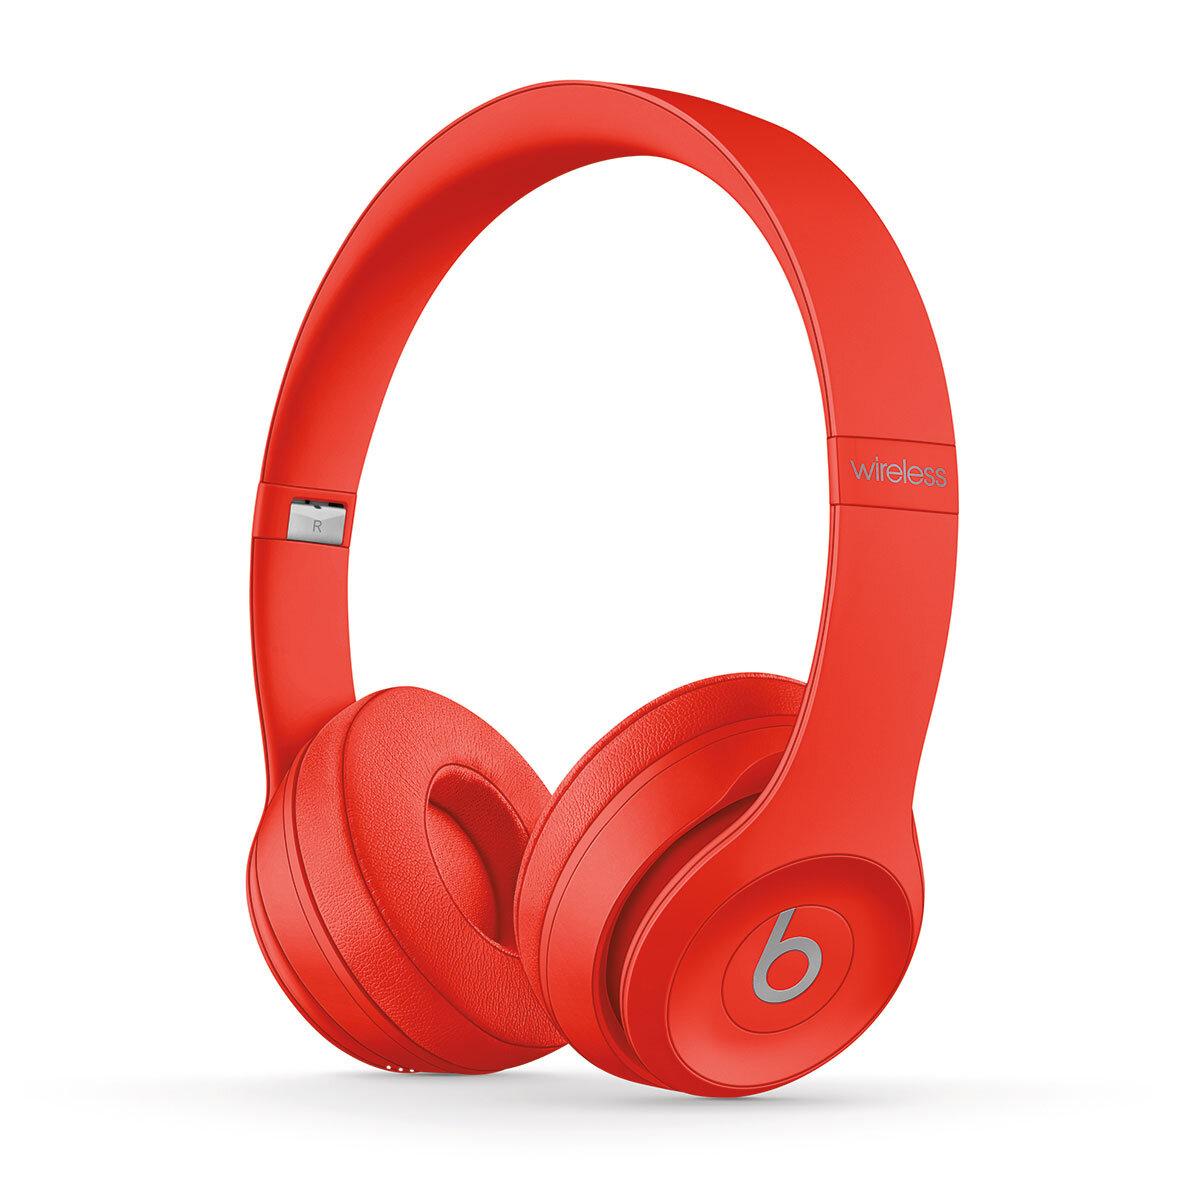 Buy Beats Solo3 Wireless Headphones - (PRODUCT)RED Citrus Red, MX472ZM/A at costco.co.uk